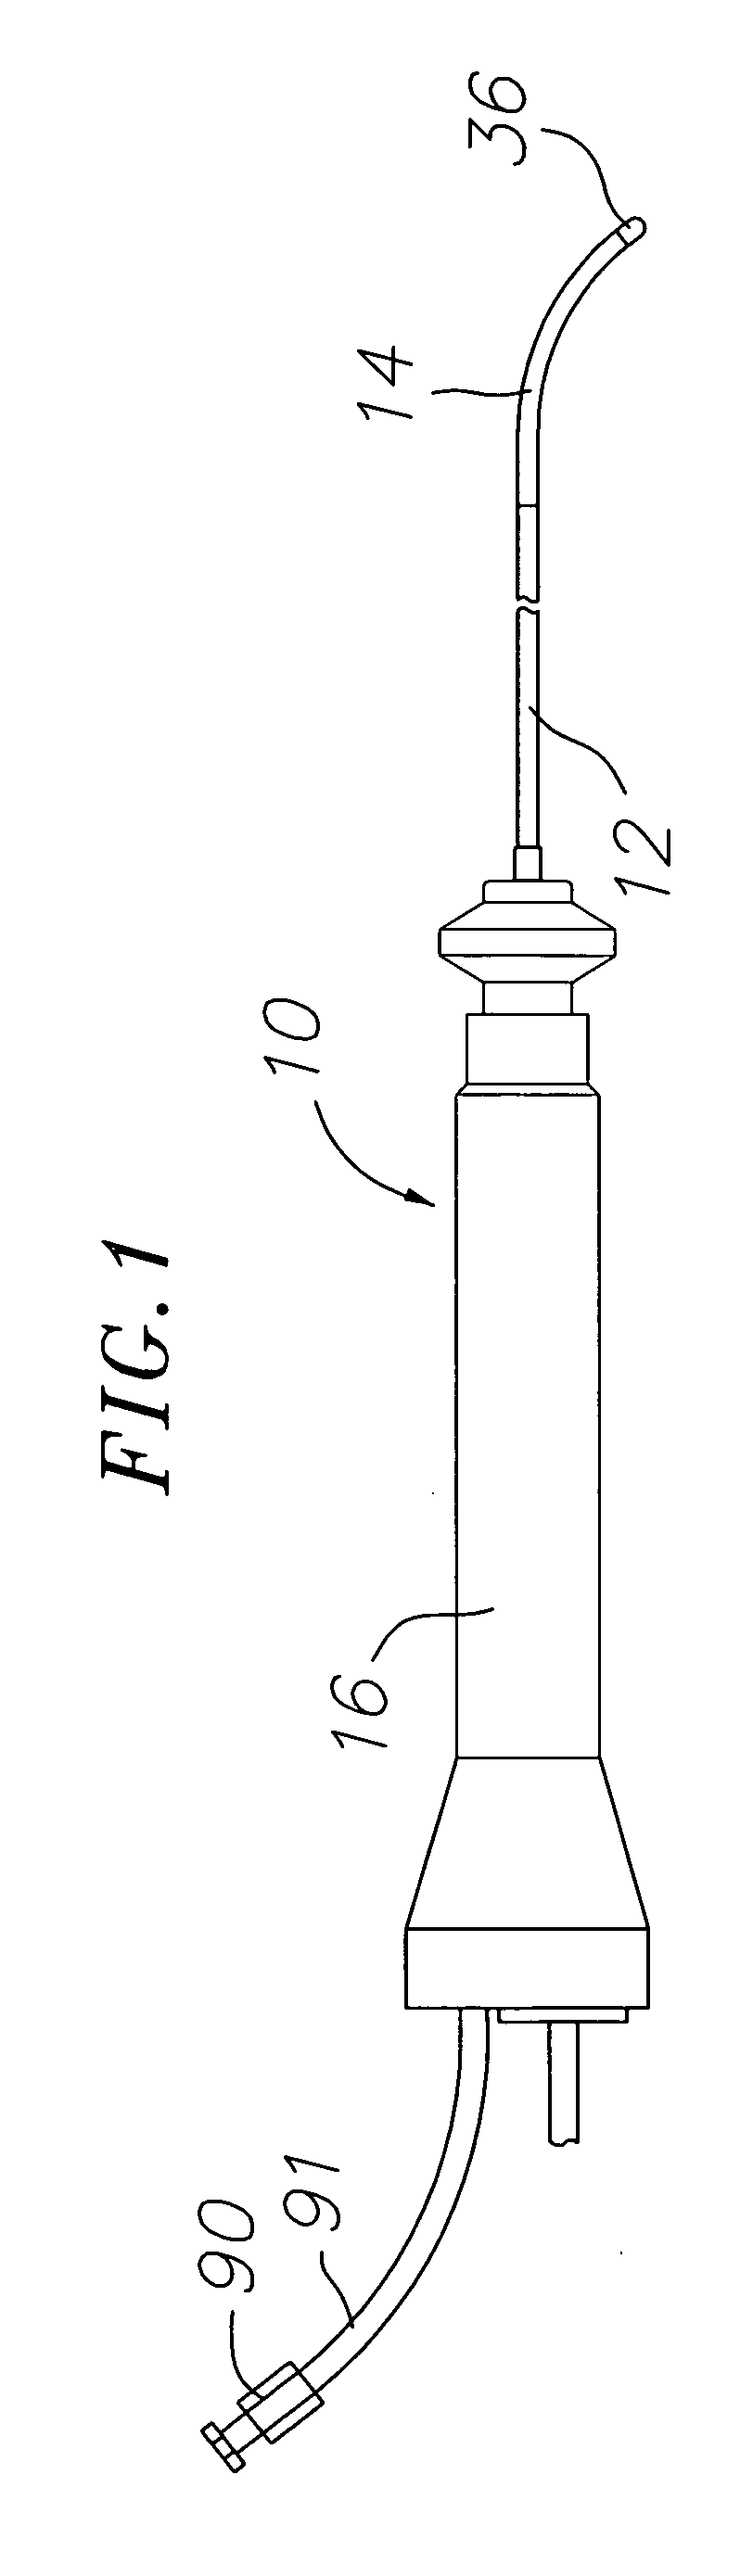 Catheter with multi port tip for optical lesion evaluation